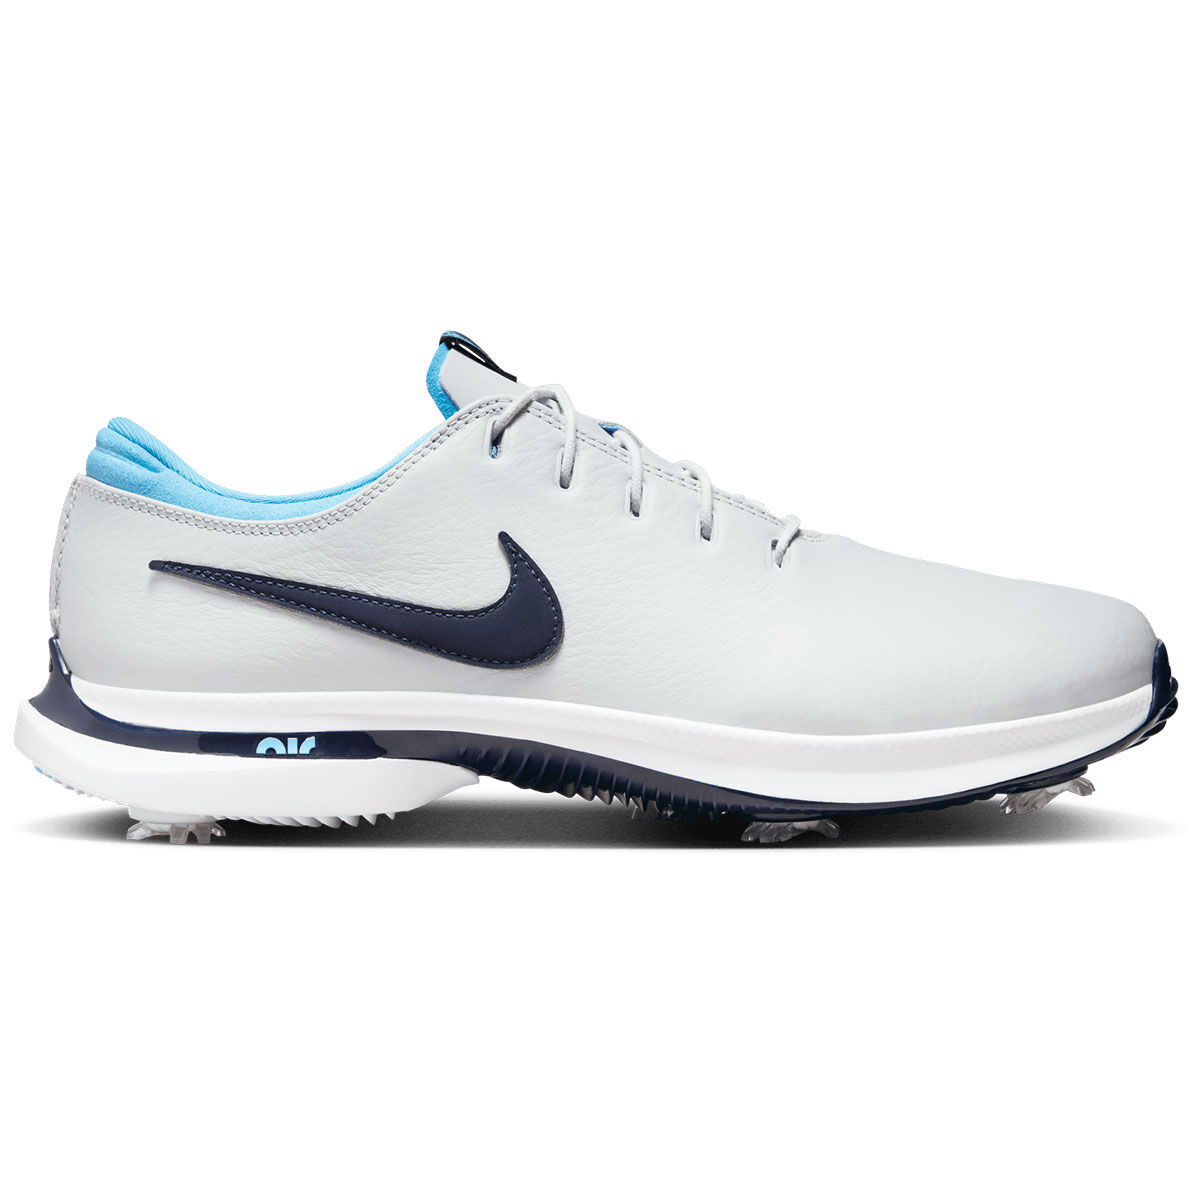 Nike Air Zoom Victory Tour 3 Waterproof Spiked Golf Shoes, Mens, Pure platinum/obsidian/white, 9 | American Golf